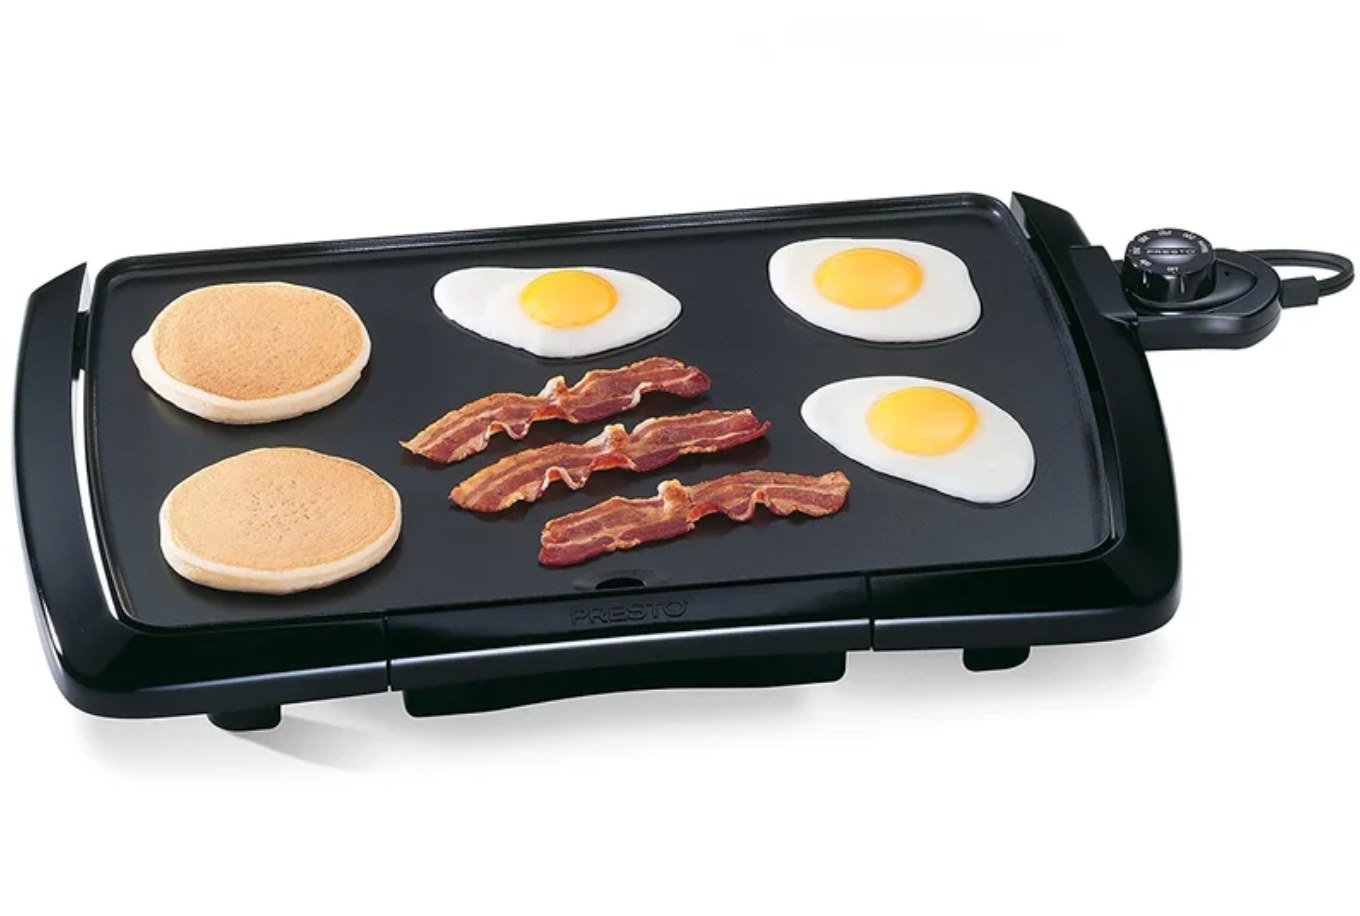 the black griddle with pancakes, bacon and eggs on it